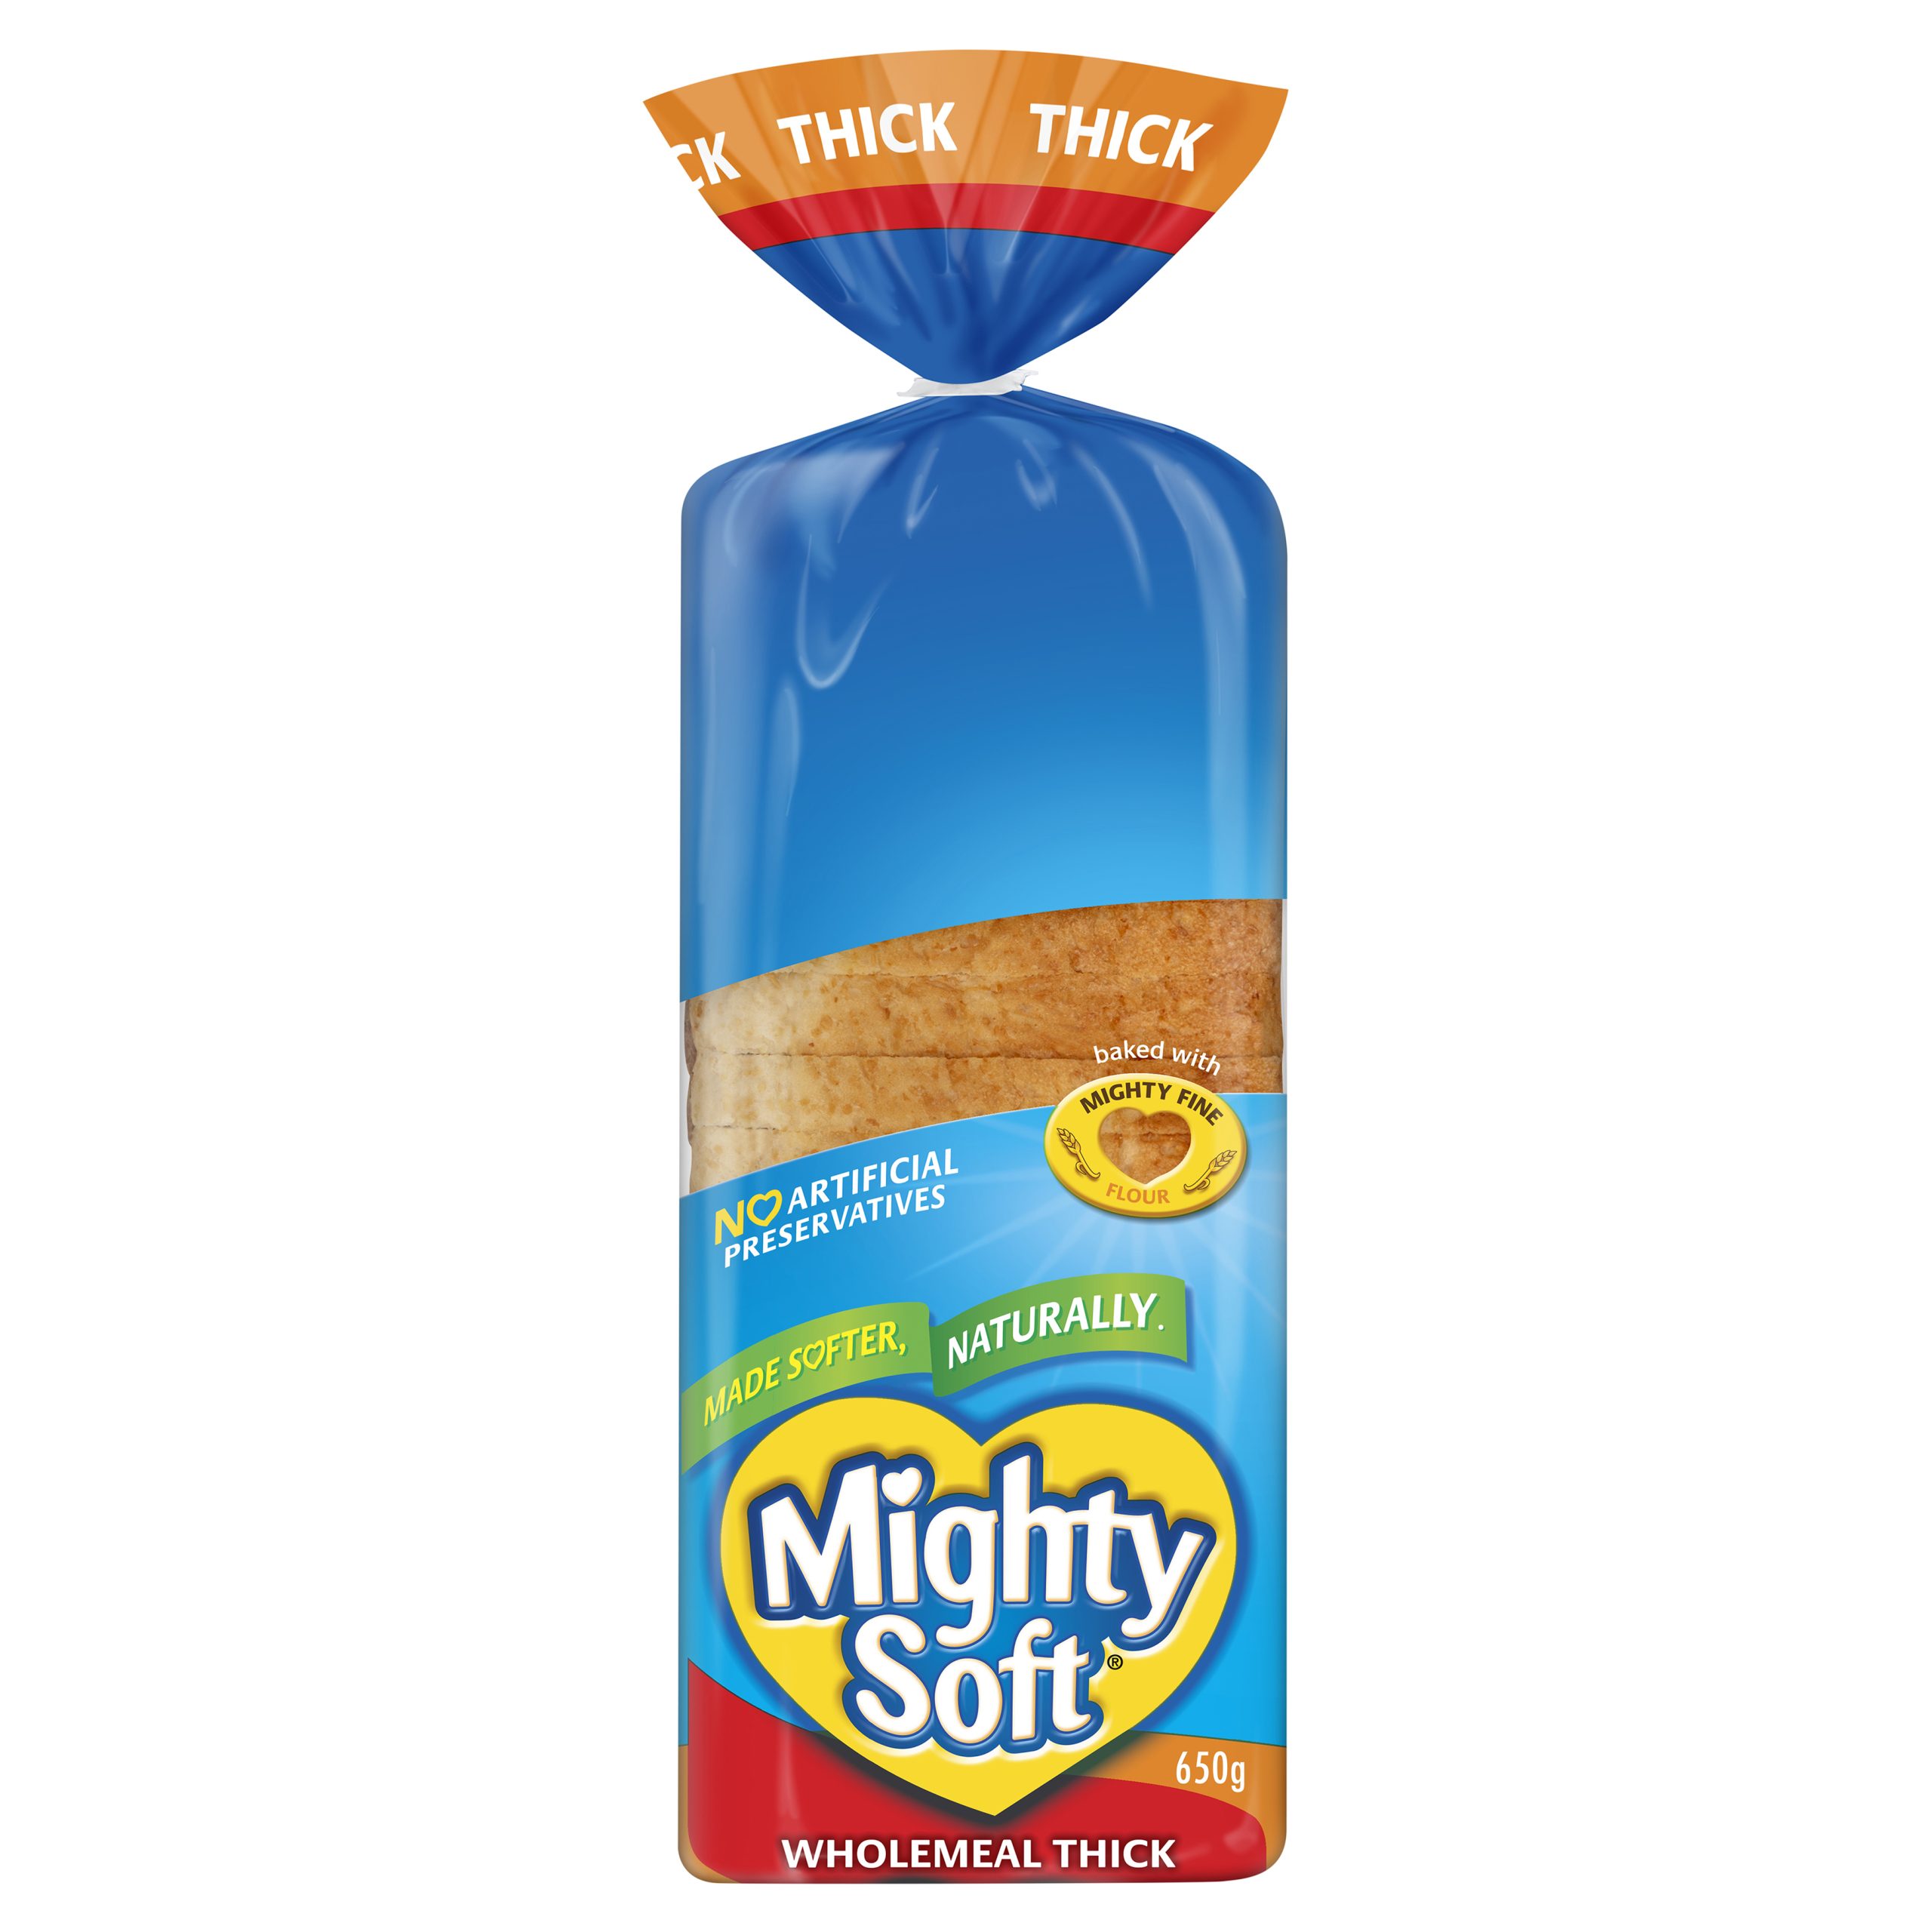 Mighty Soft Loaf Wholemeal Thick 650 g